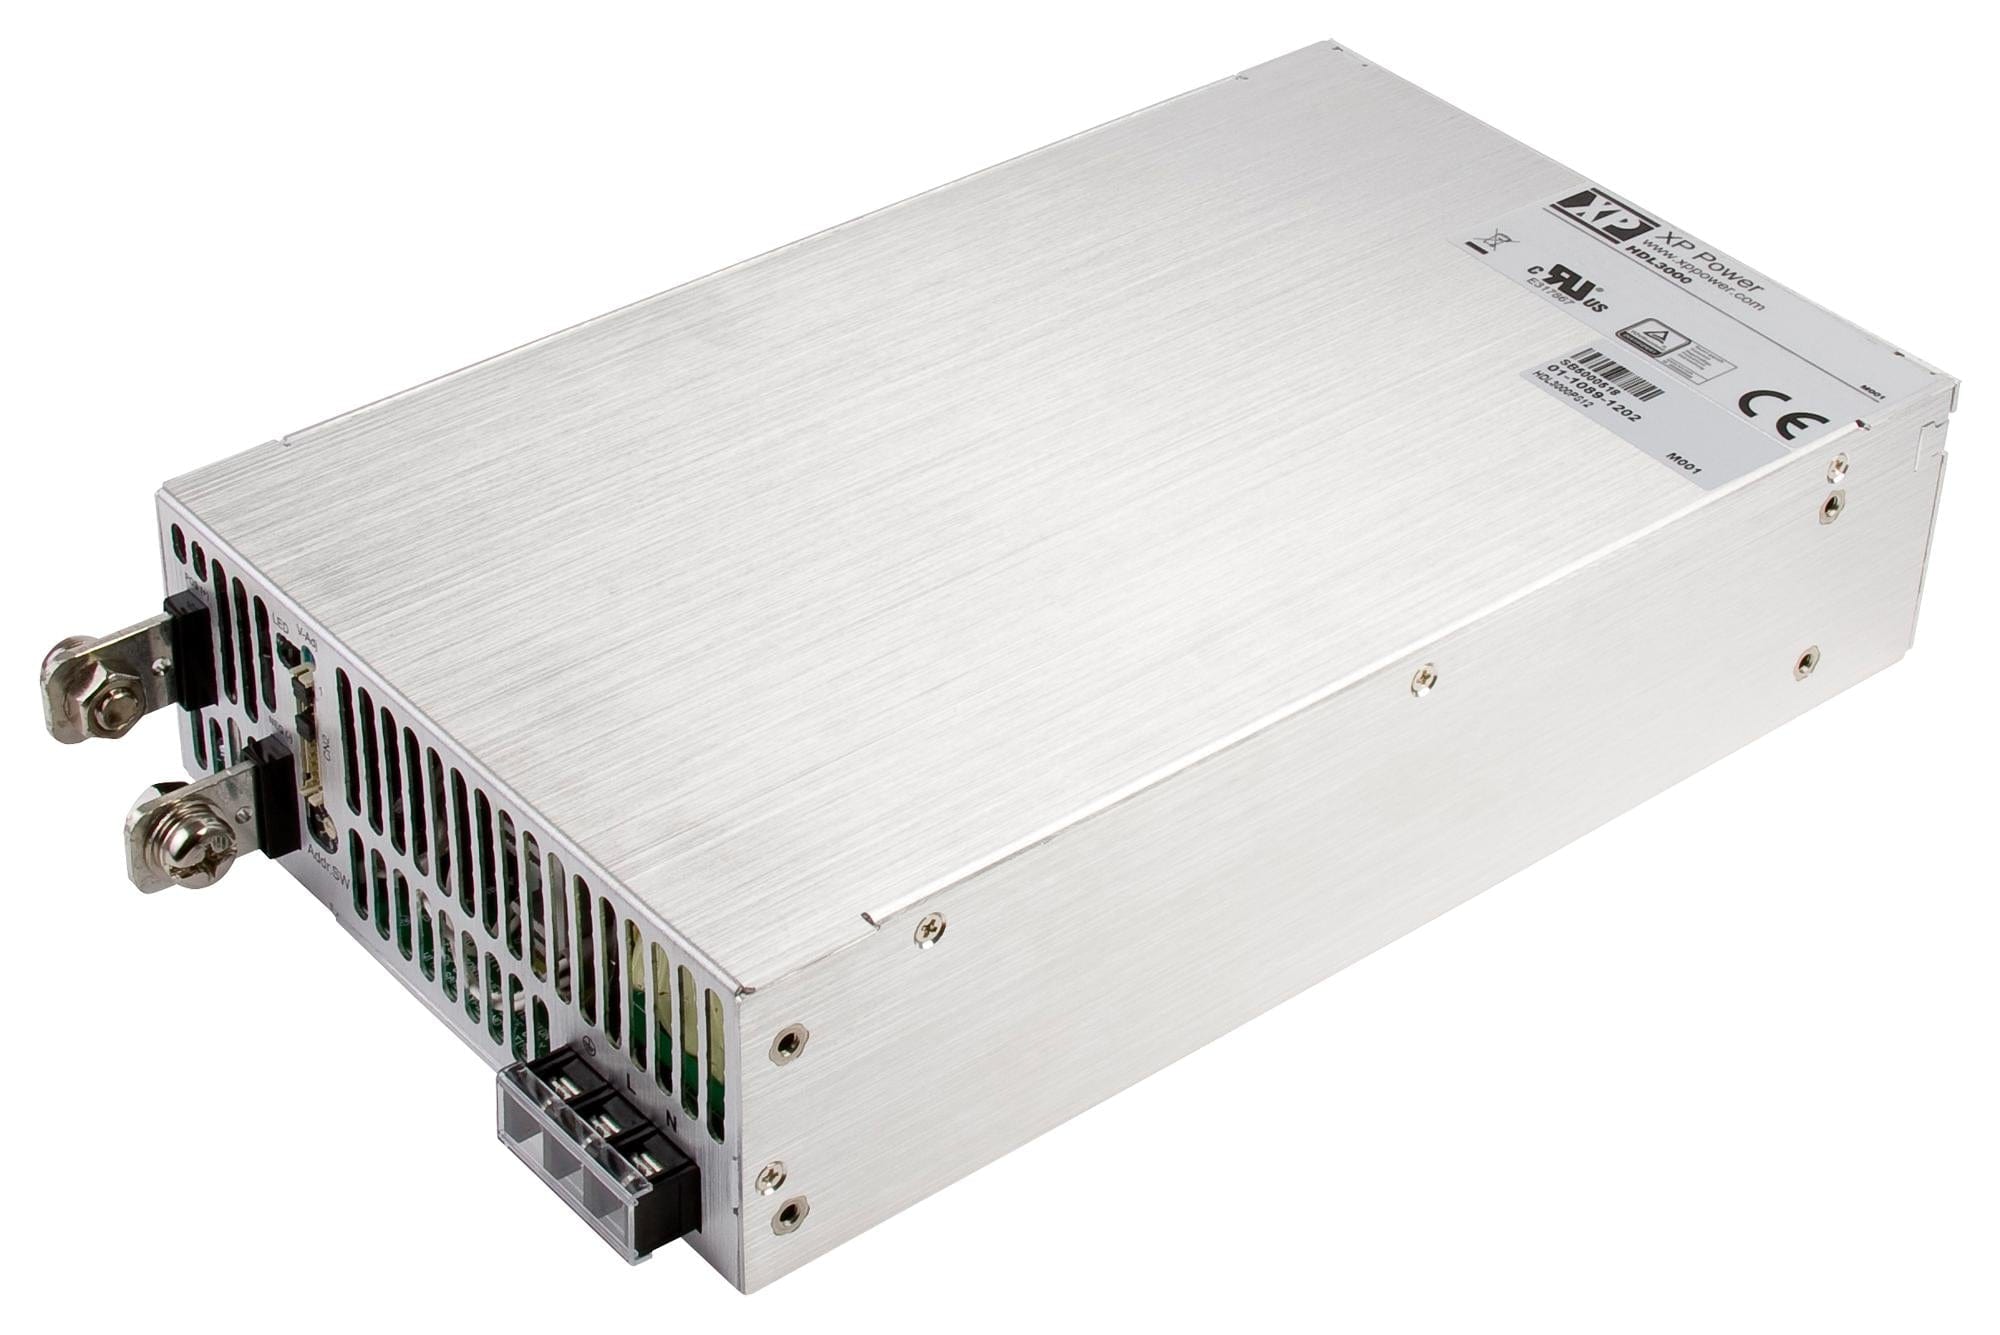 XP POWER Enclosed - Single Output HDL3000PS30 POWER SUPPLY, AC-DC, 30V, 100A XP POWER 3524108 HDL3000PS30